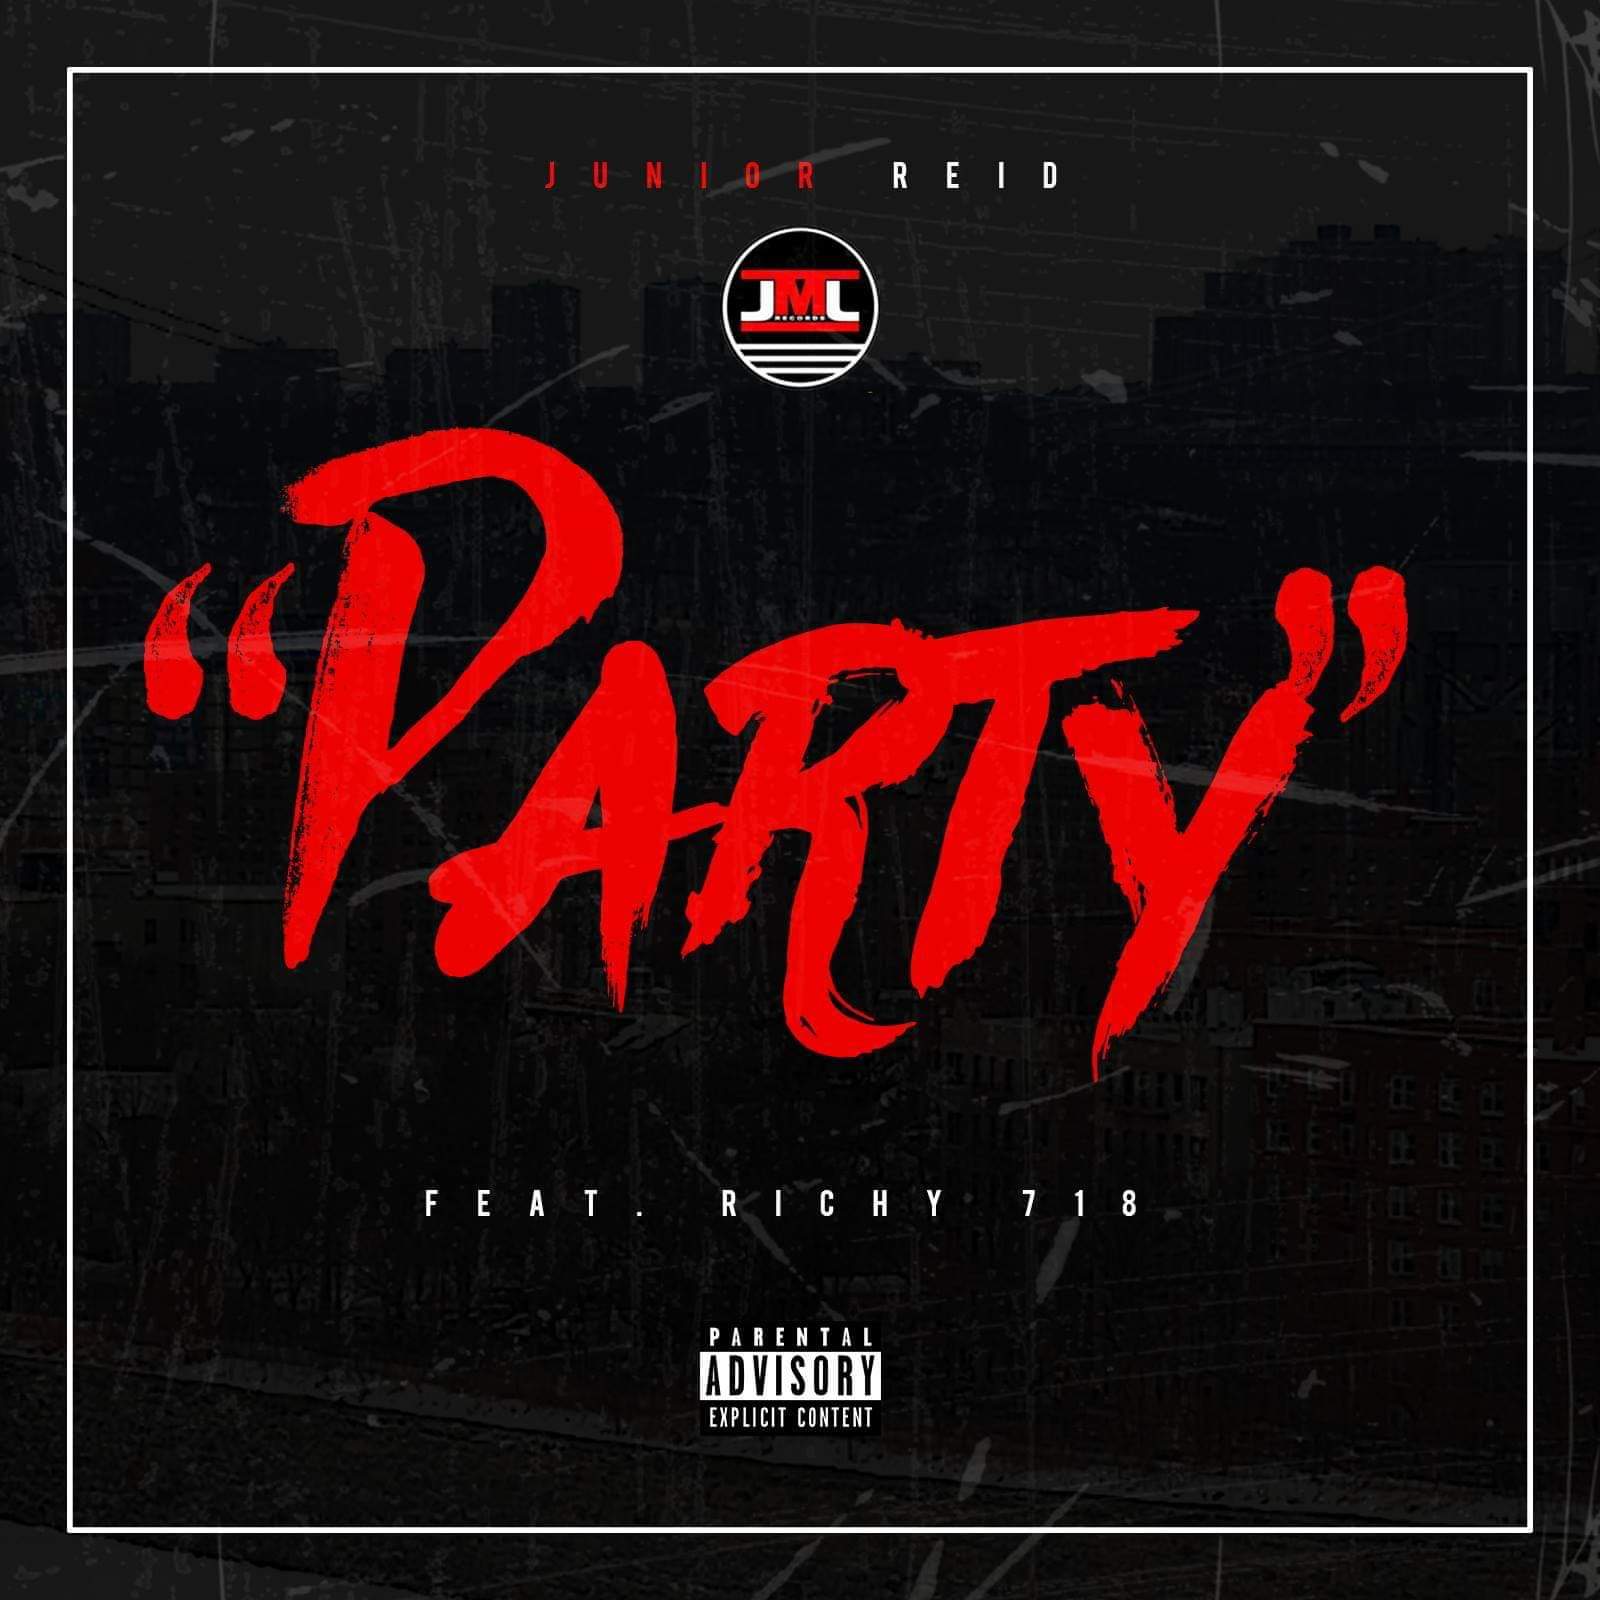 Junior Reid & Richy718 Unite For The Club-Inspired “Party”